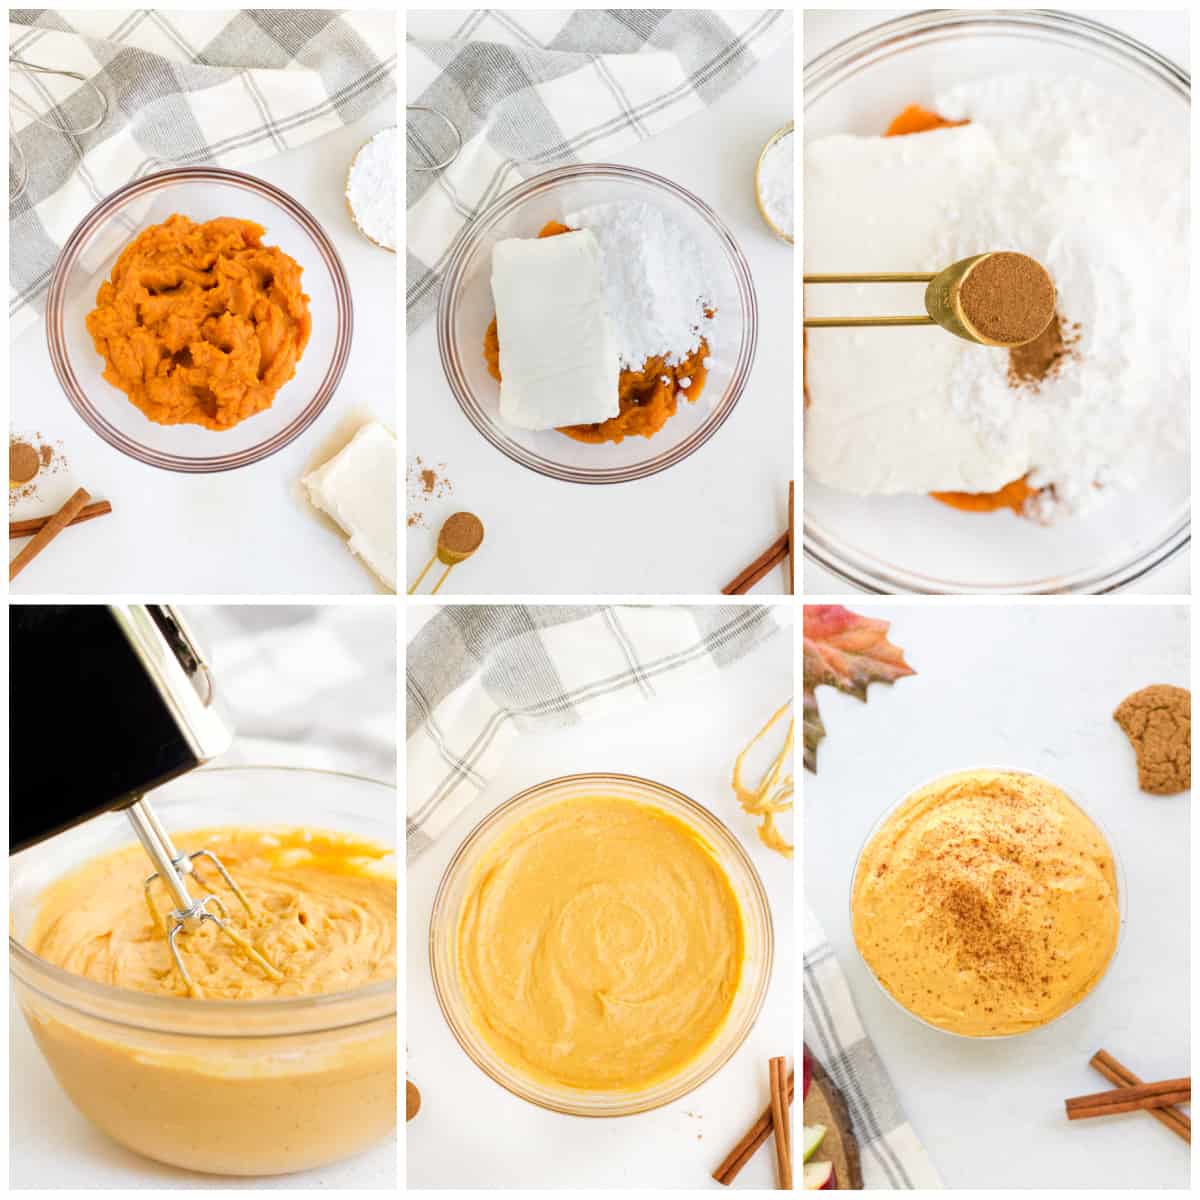 Step by step photos on how to make Pumpkin Dip.